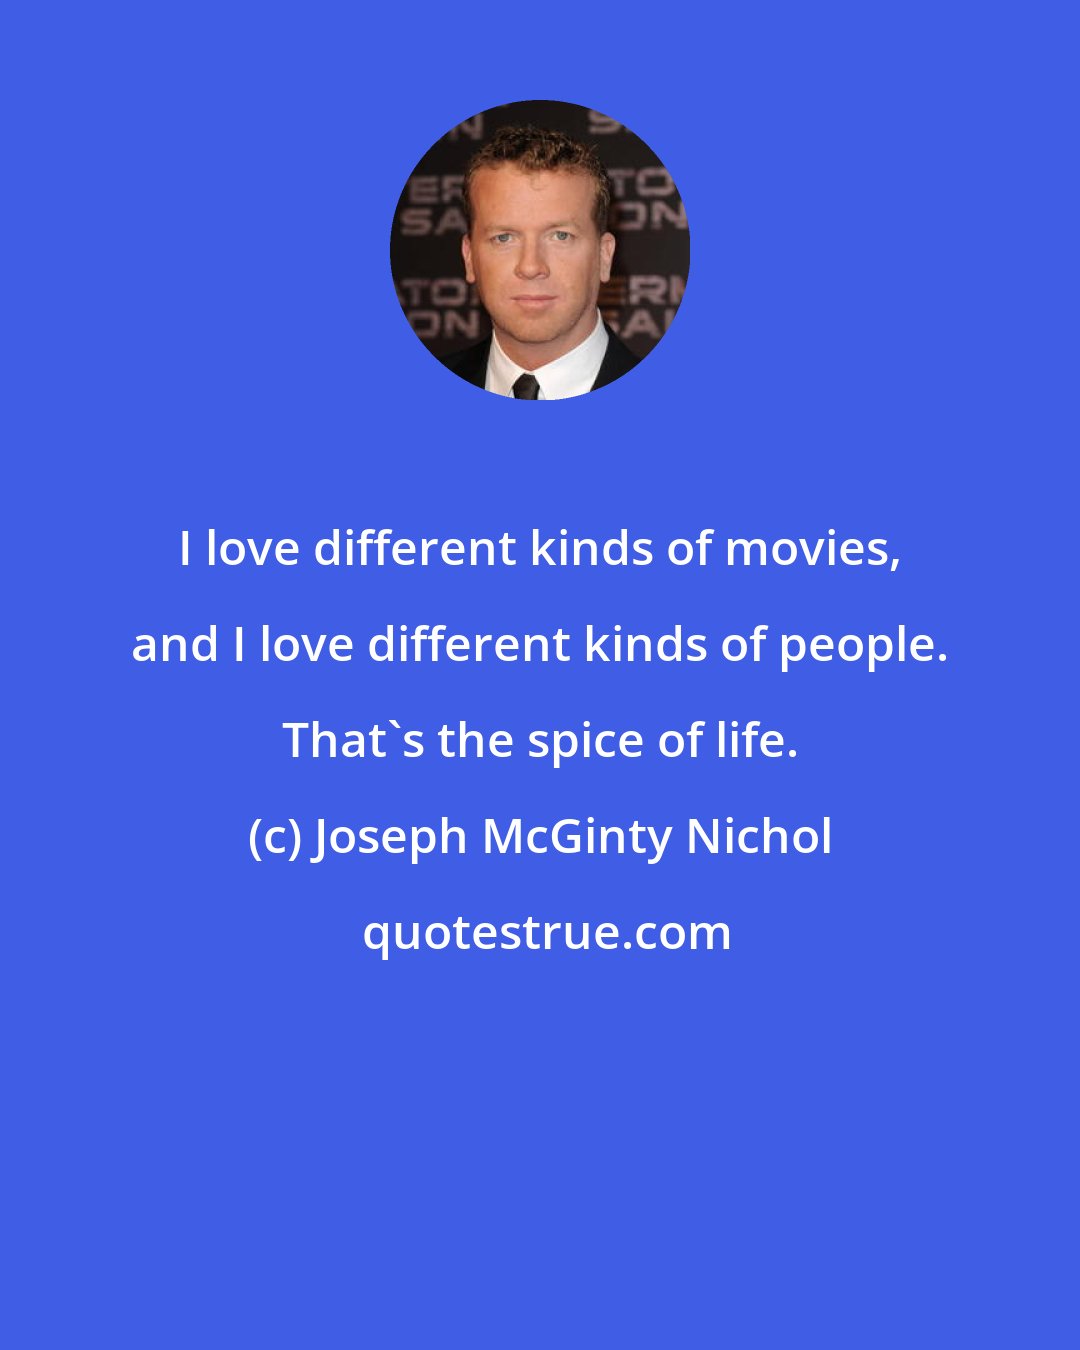 Joseph McGinty Nichol: I love different kinds of movies, and I love different kinds of people. That's the spice of life.